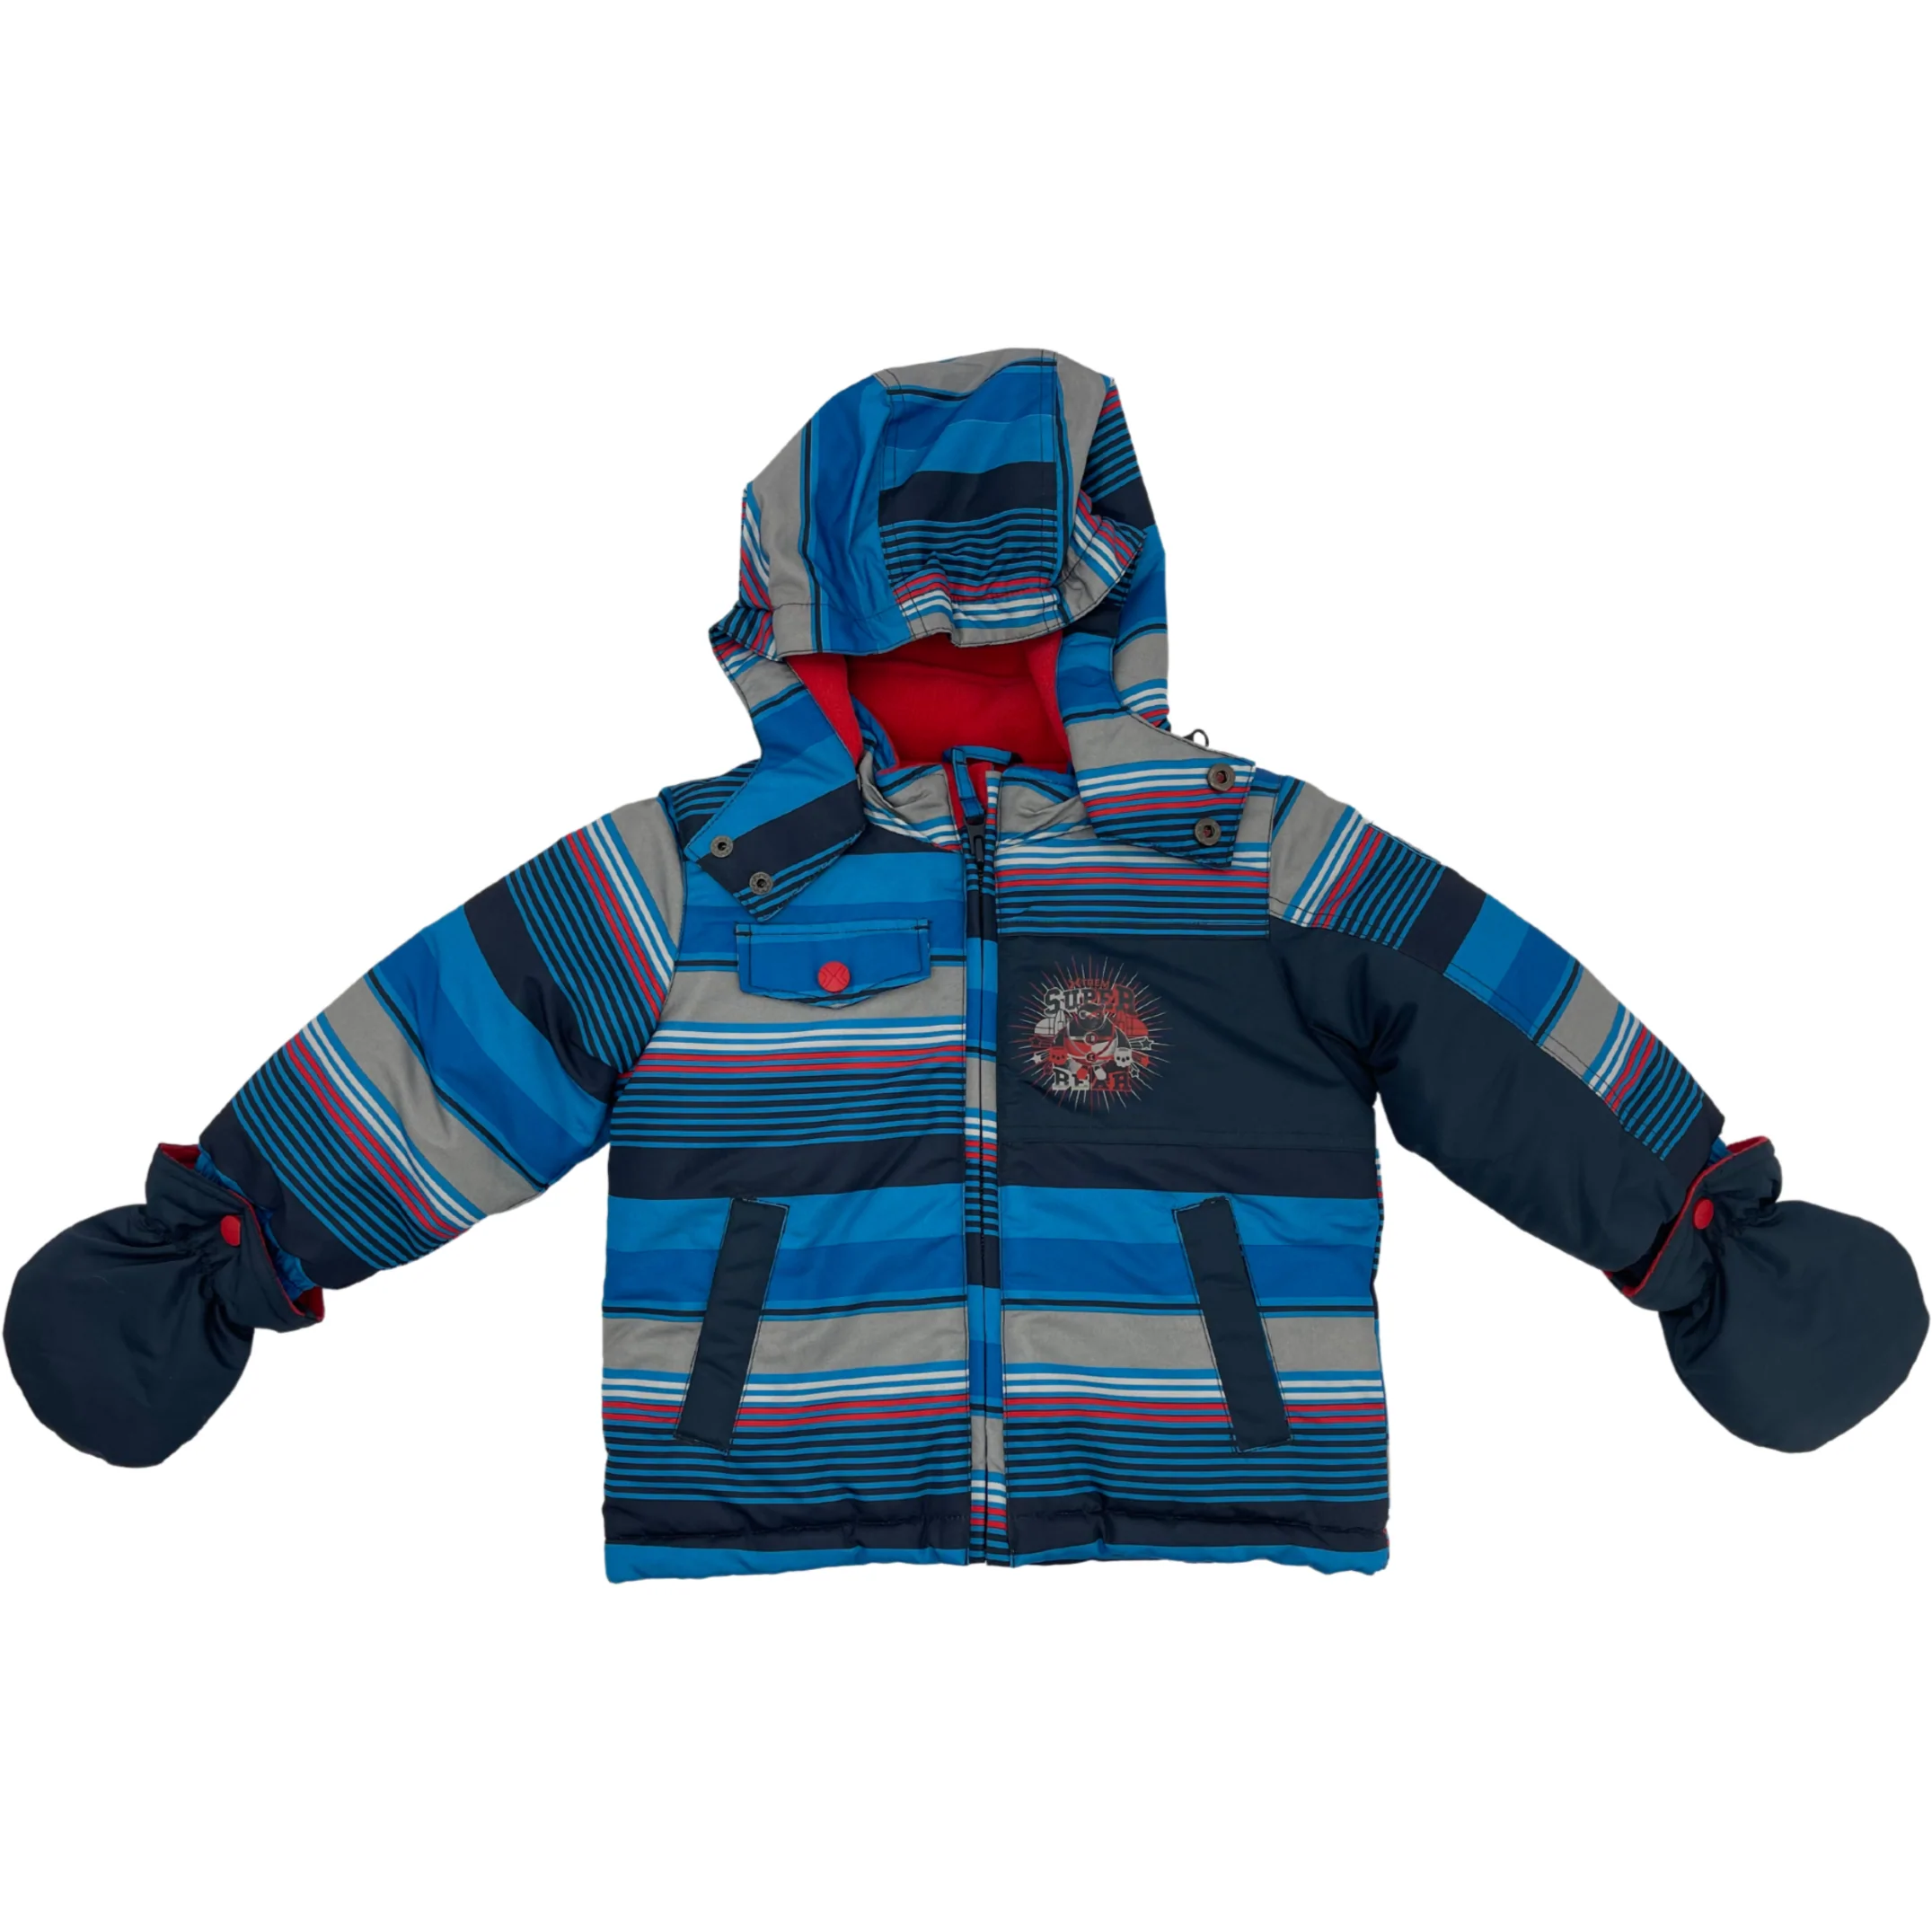 Xtrem by Gusti Toddler Boy's Winter Jacket / Blue with Stripes / Size 24 Months